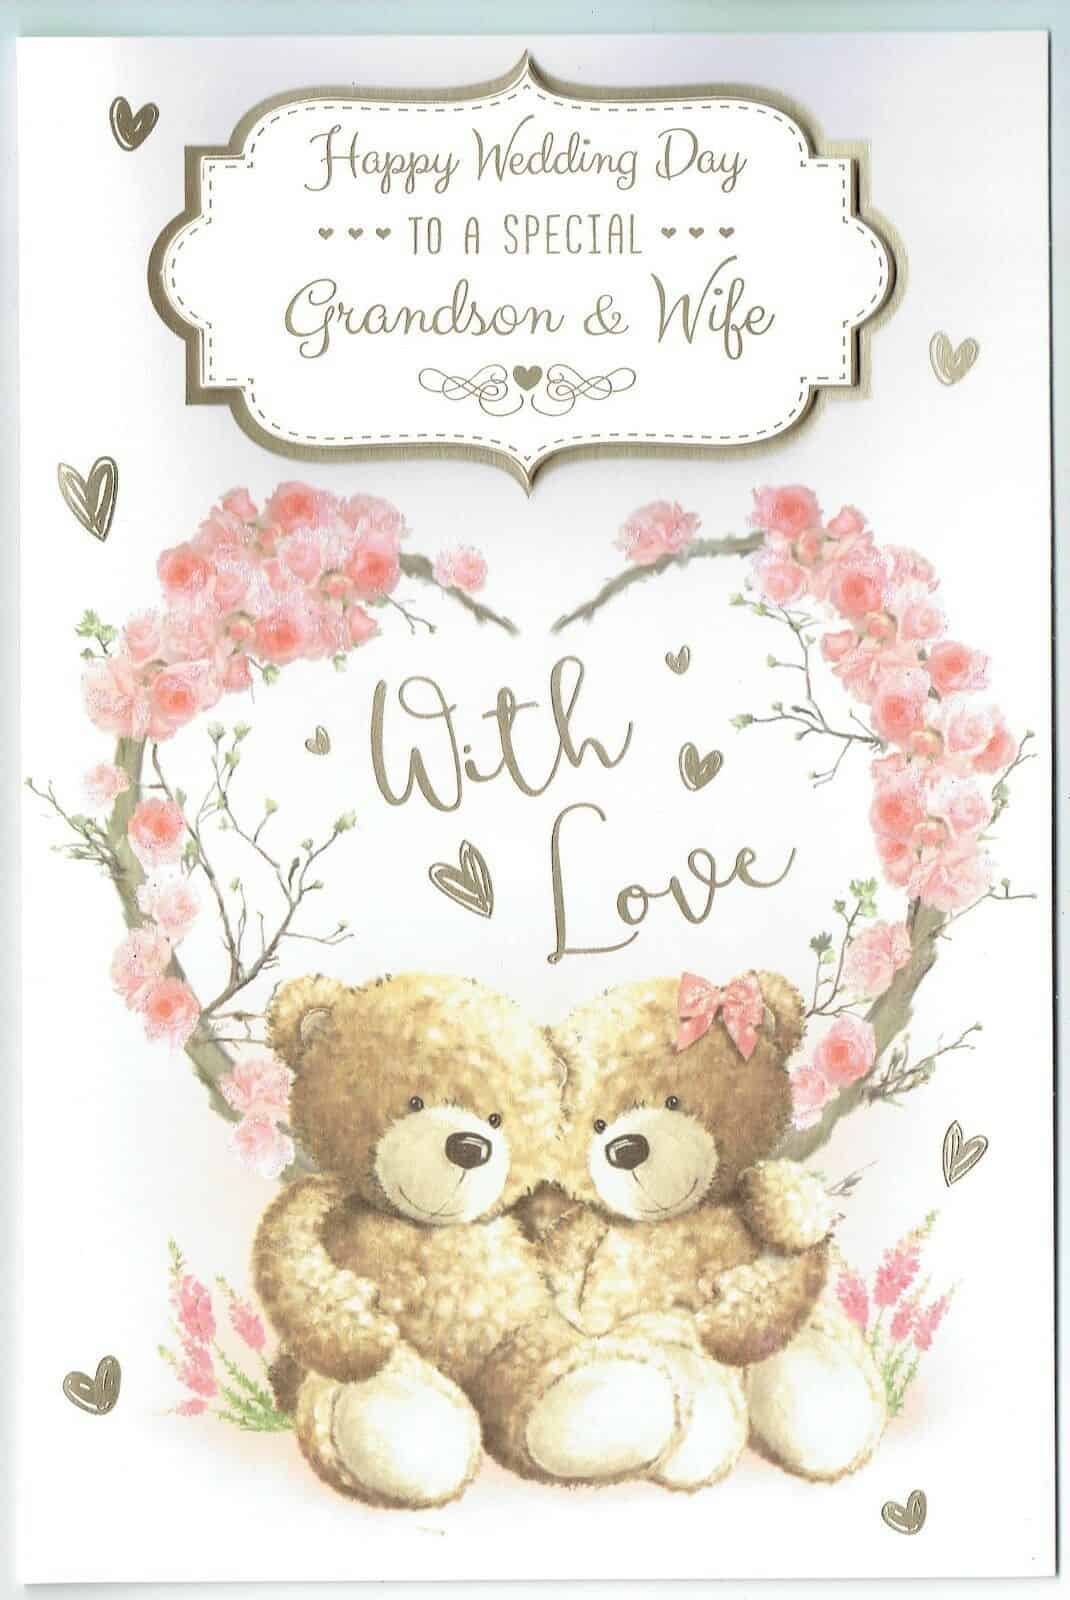 CUTE card! Wedding Day Wishes to a Lovely Granddaughter and Her New Husband..